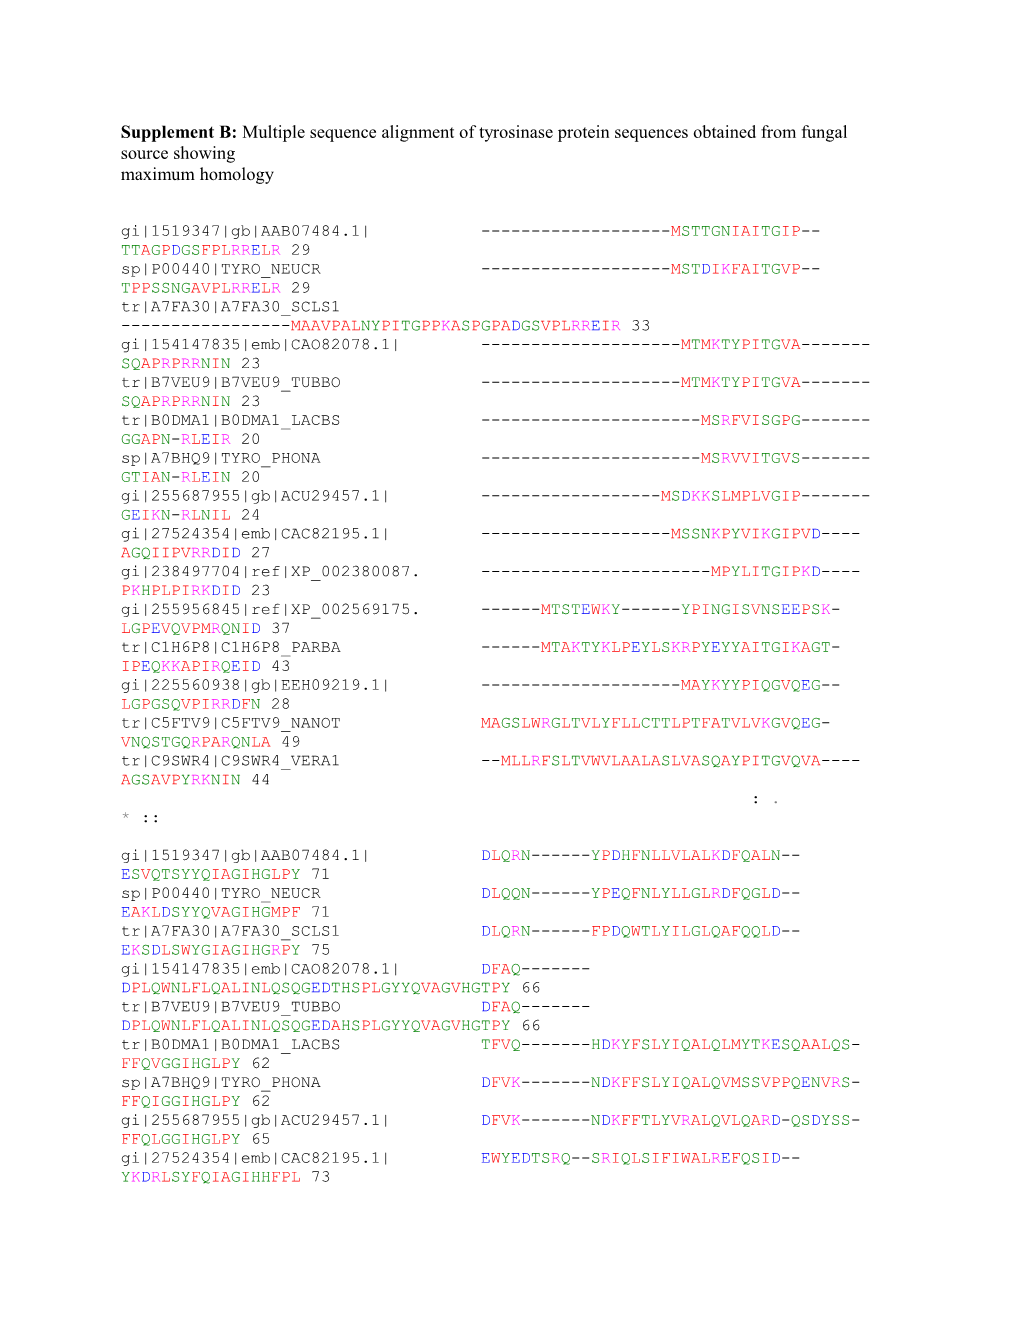 Supplement B: Multiple Sequence Alignment of Tyrosinase Protein Sequences Obtained From